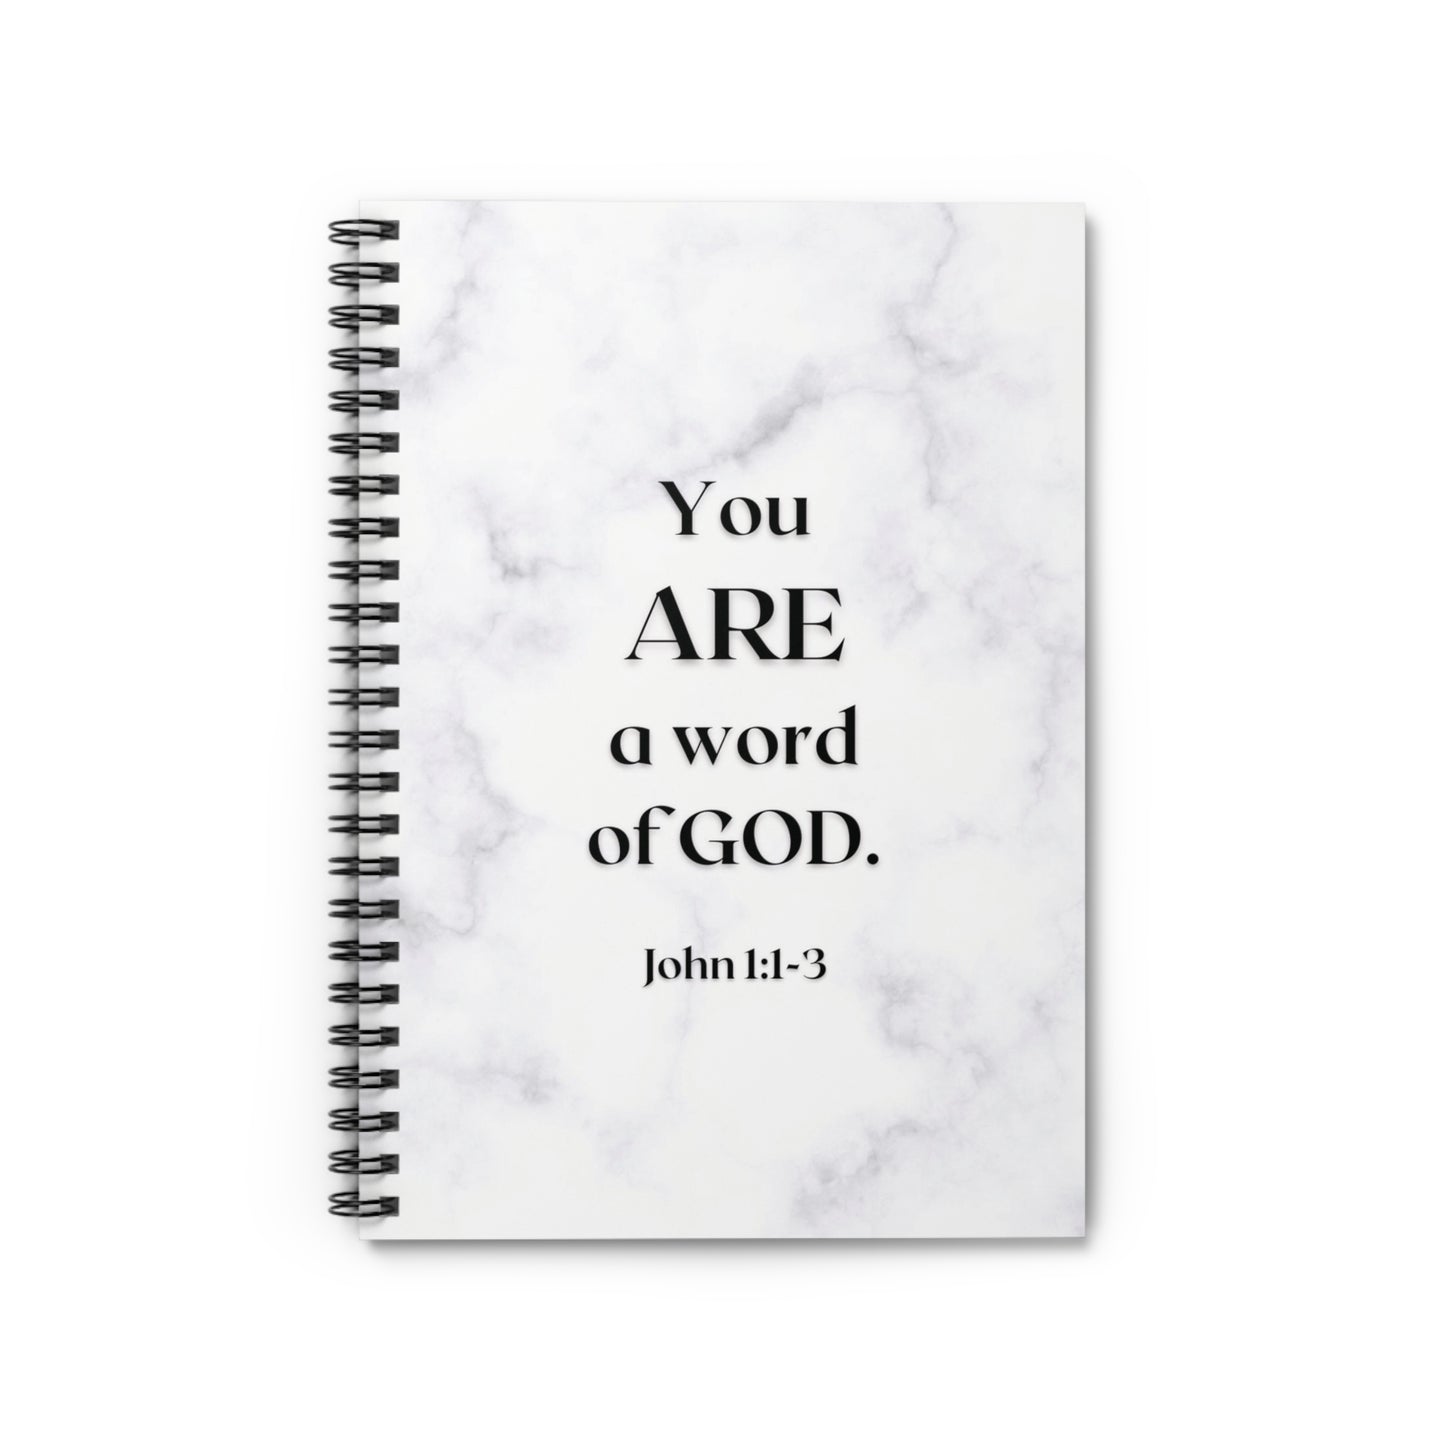 Spiral Notebook - You ARE a word of God - John 1:1-3 - Ruled Line